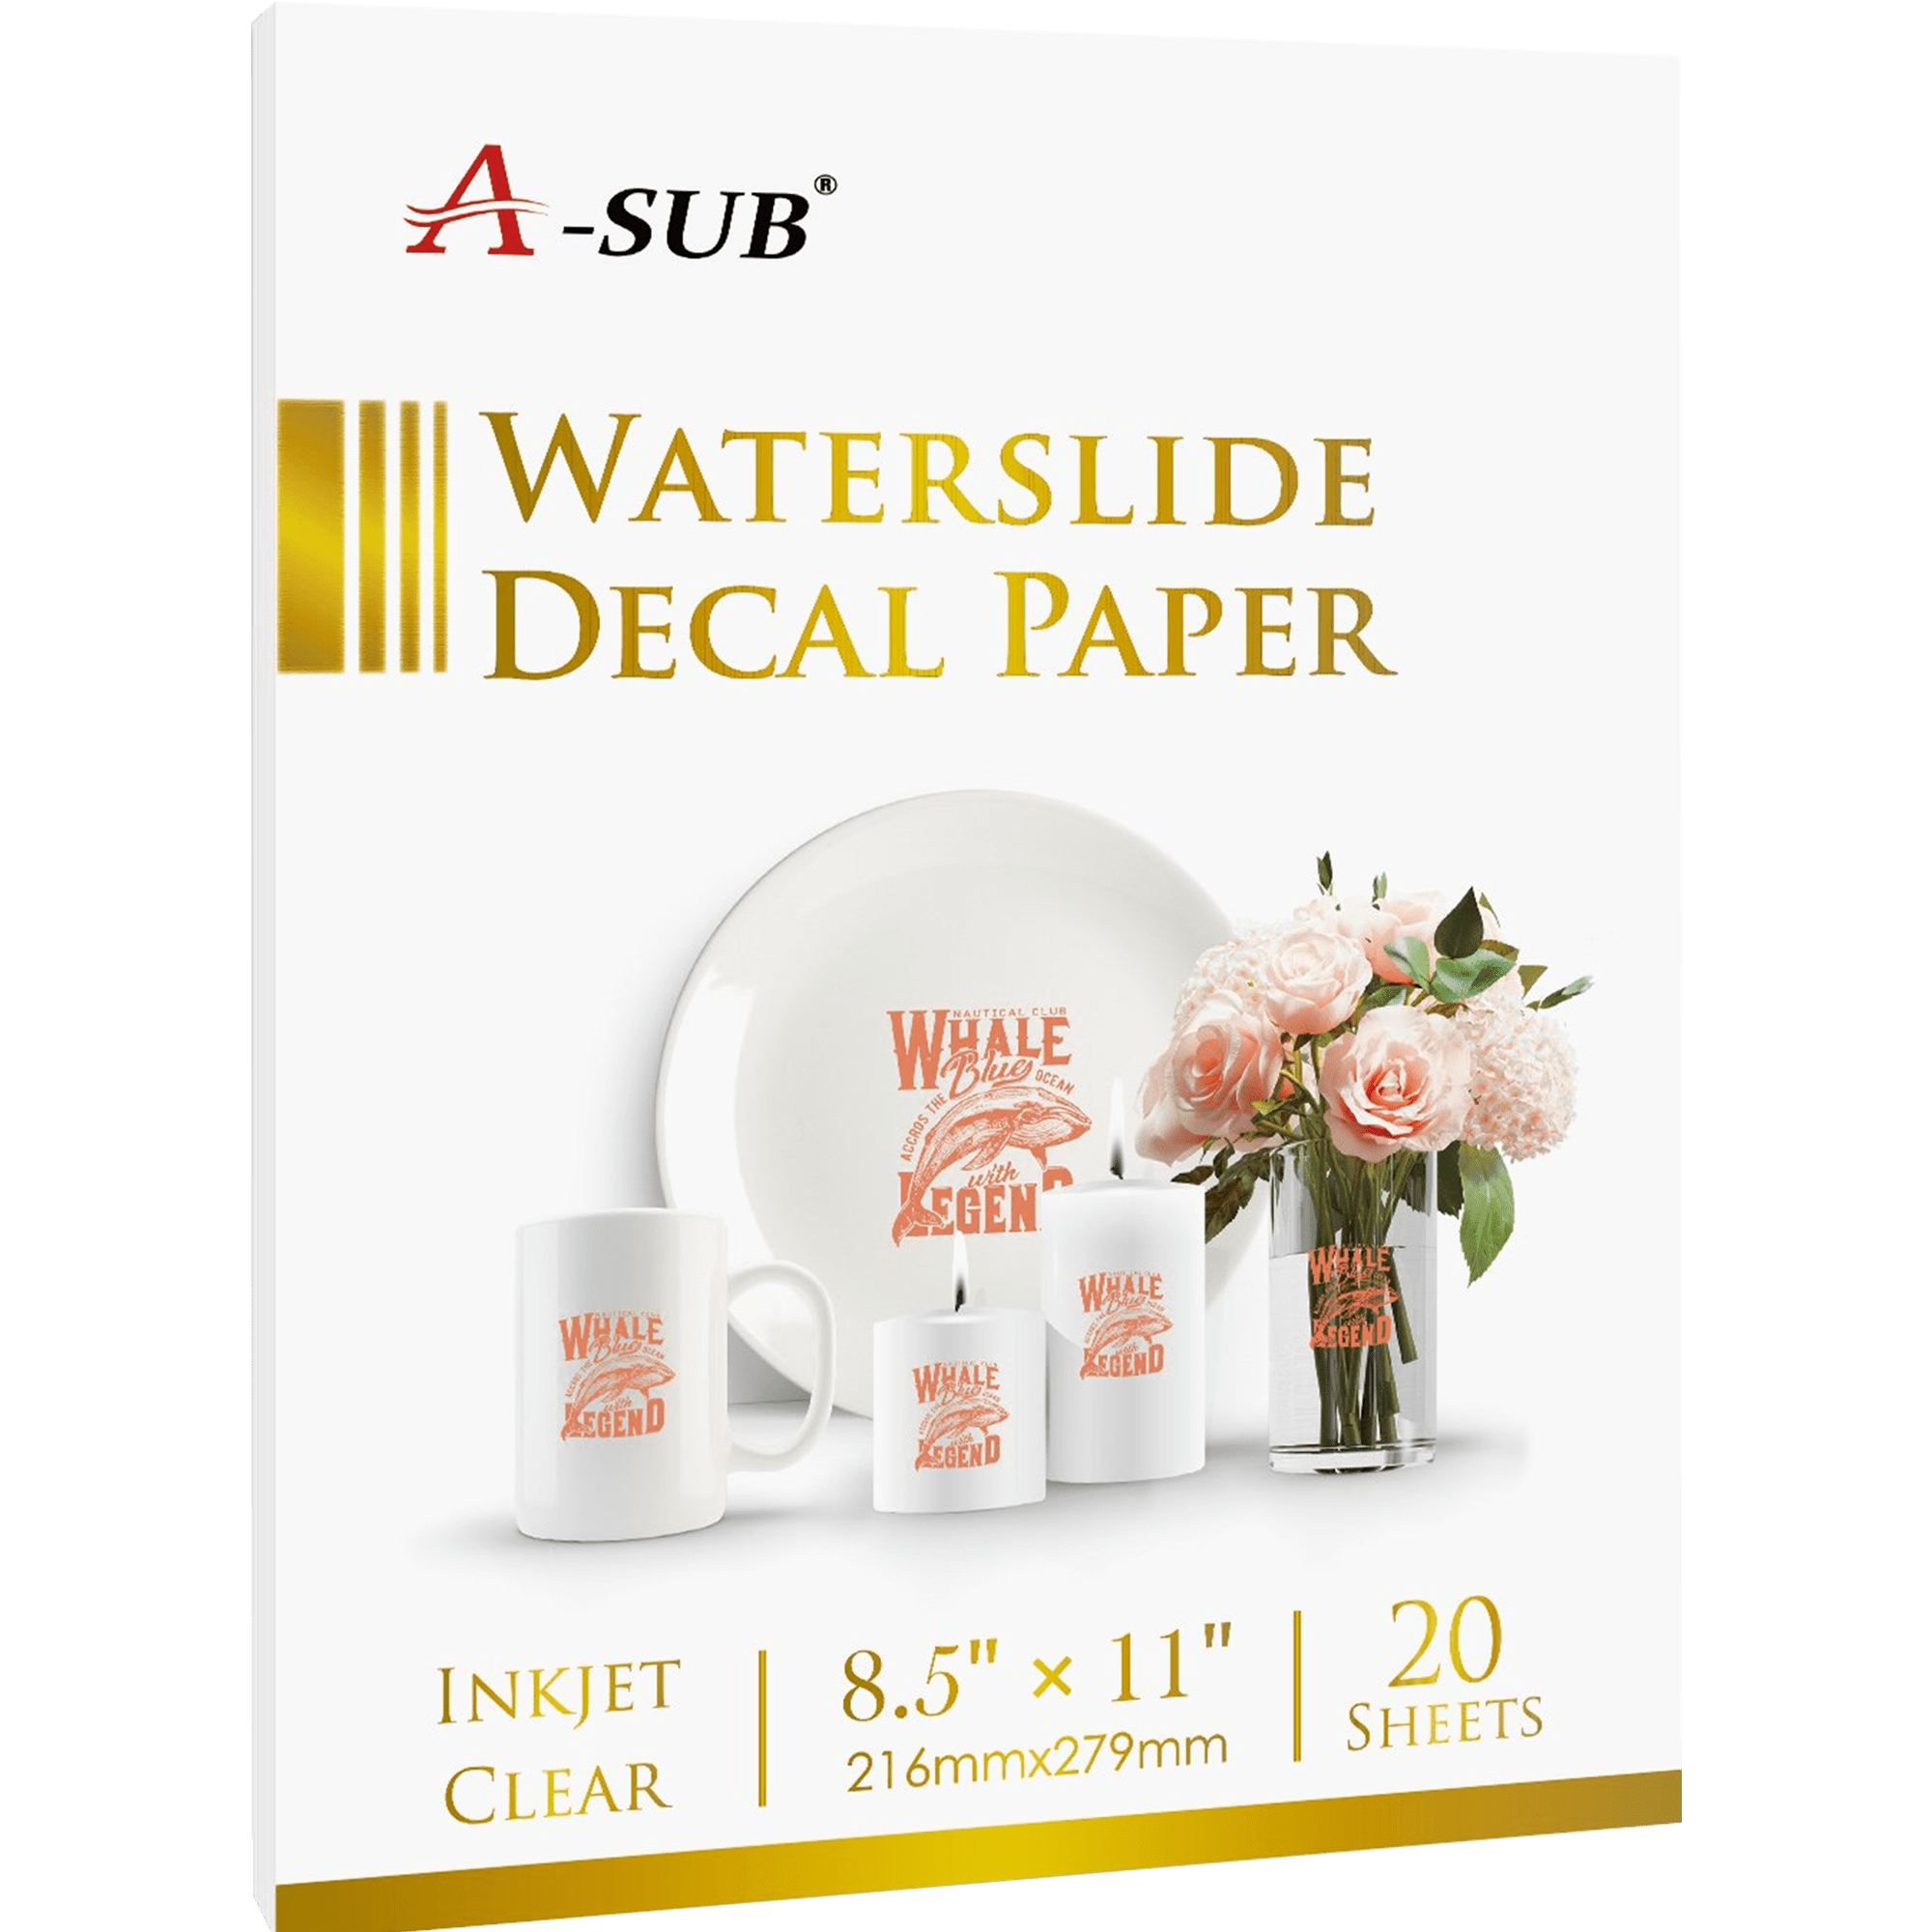  Waterslide Paper-20 sheet Inkjet Water Slide Paper,A4 Size  clear waterslide paper for DIY Decals Gift Crafts Ceramics Candles and  Custom Tumblers, waterslide decal paper (The packaging may be blue) : Office